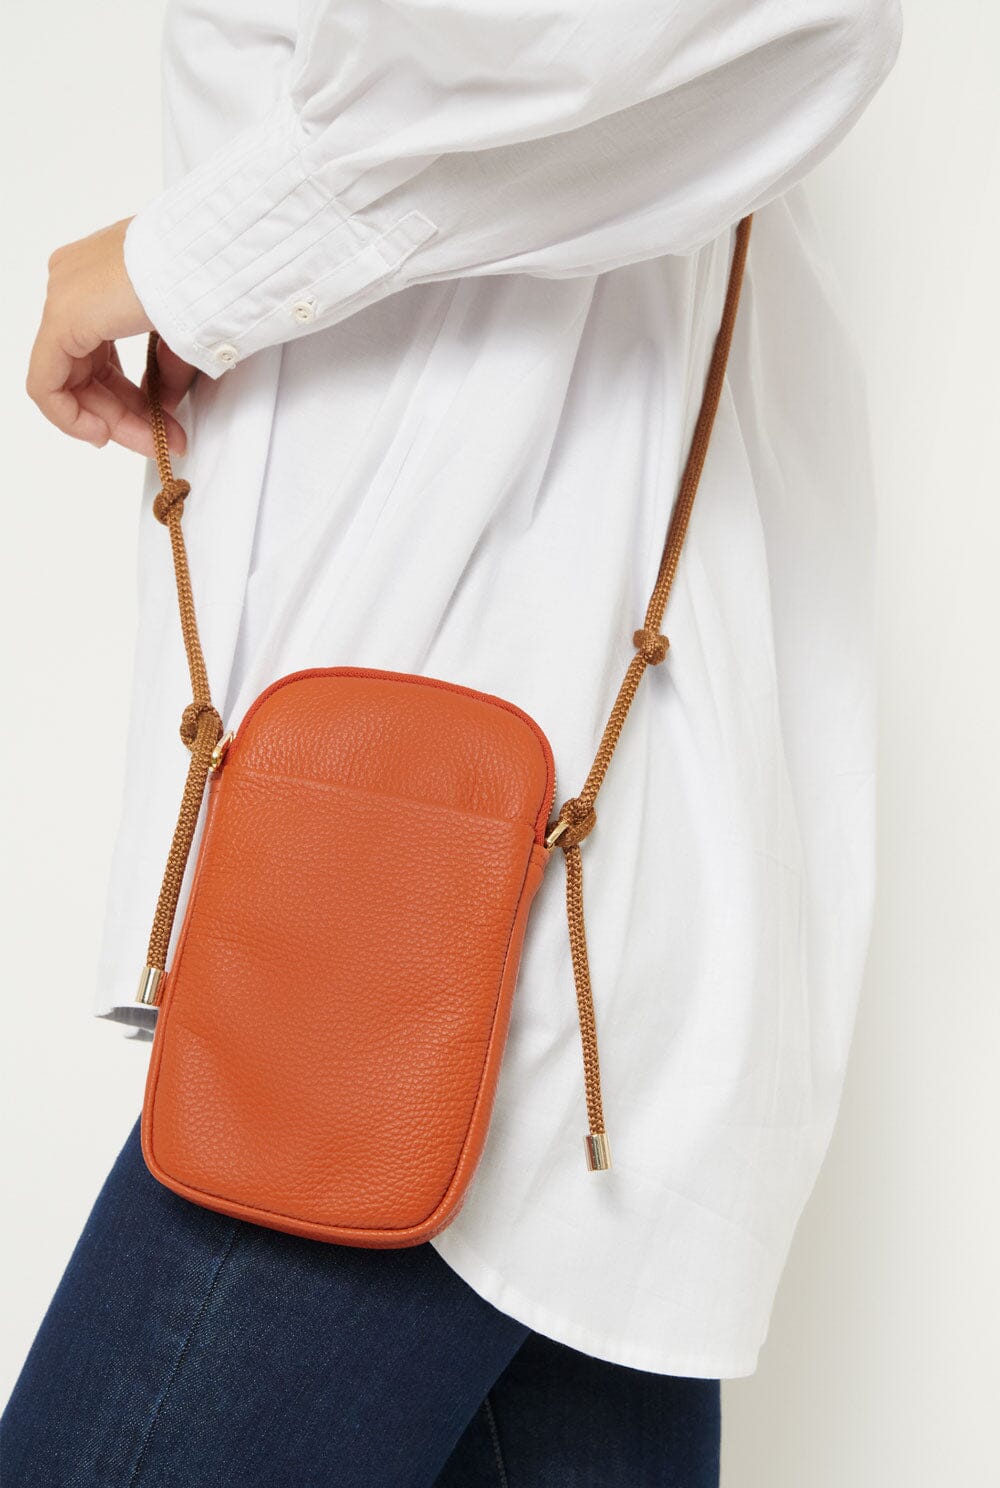 The Lore Bag Calabaza Crossbody bags The Bag Lab 